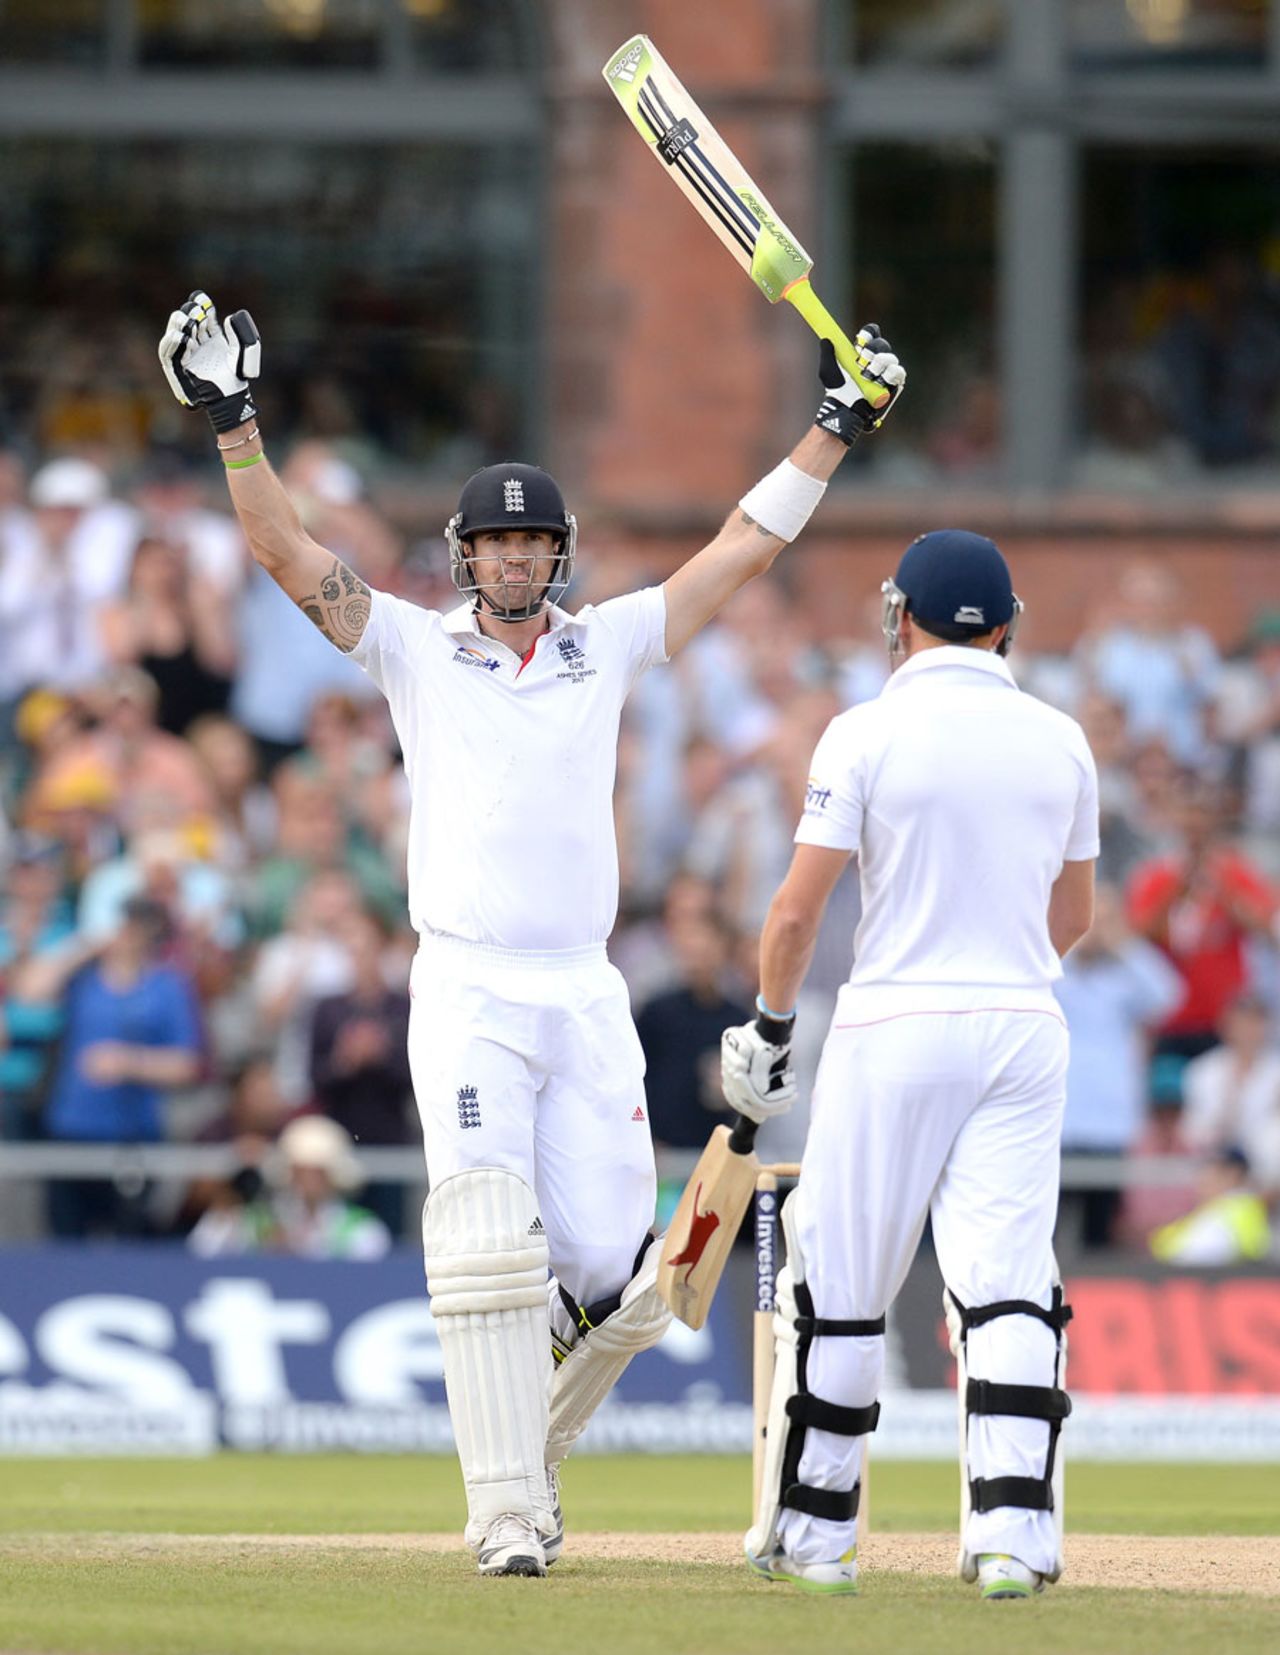 Kevin Pietersen made his first Test hundred at Old Trafford, England v Australia, 3rd Investec Test, Old Trafford, 3rd day, August 3, 2013